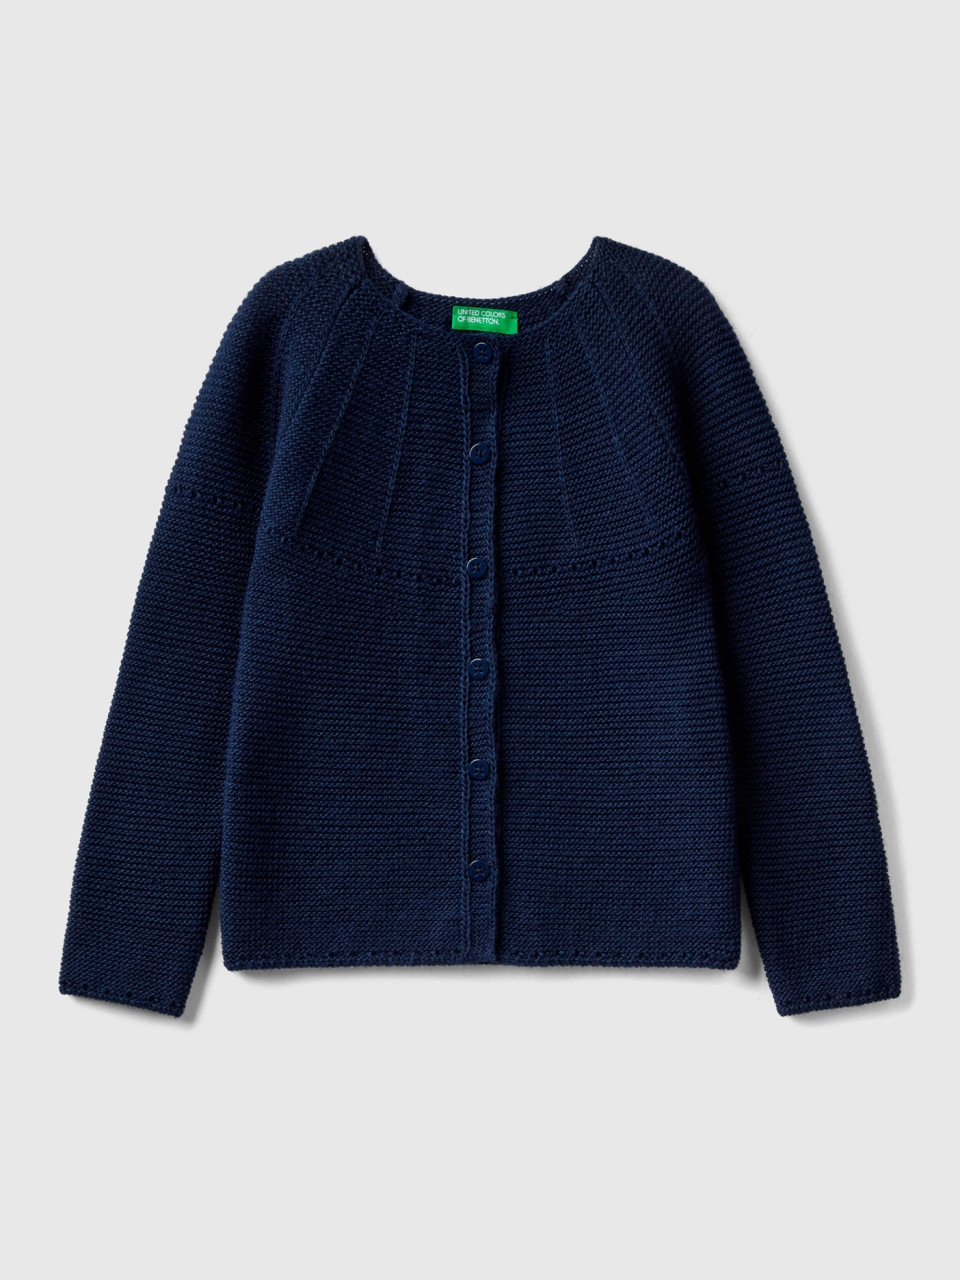 Benetton, Cardigan With Perforated Details, Dark Blue, Kids